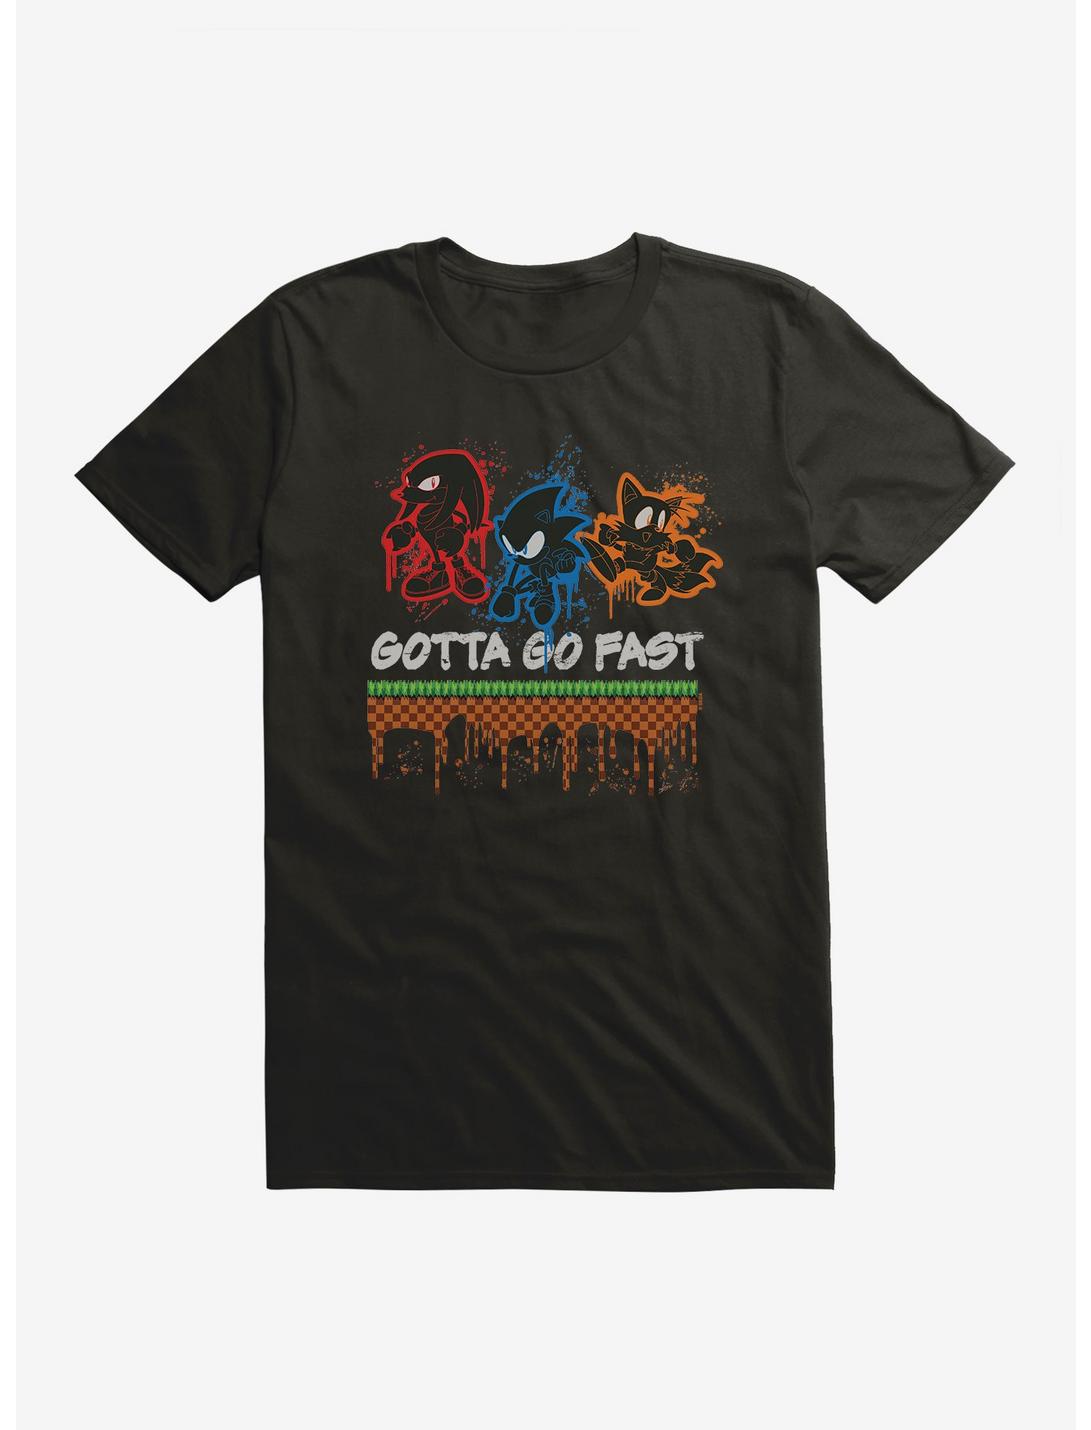 Sonic The Hedgehog Tails, Knuckles, And Sonic Gotta Go Fast! T-Shirt, , hi-res